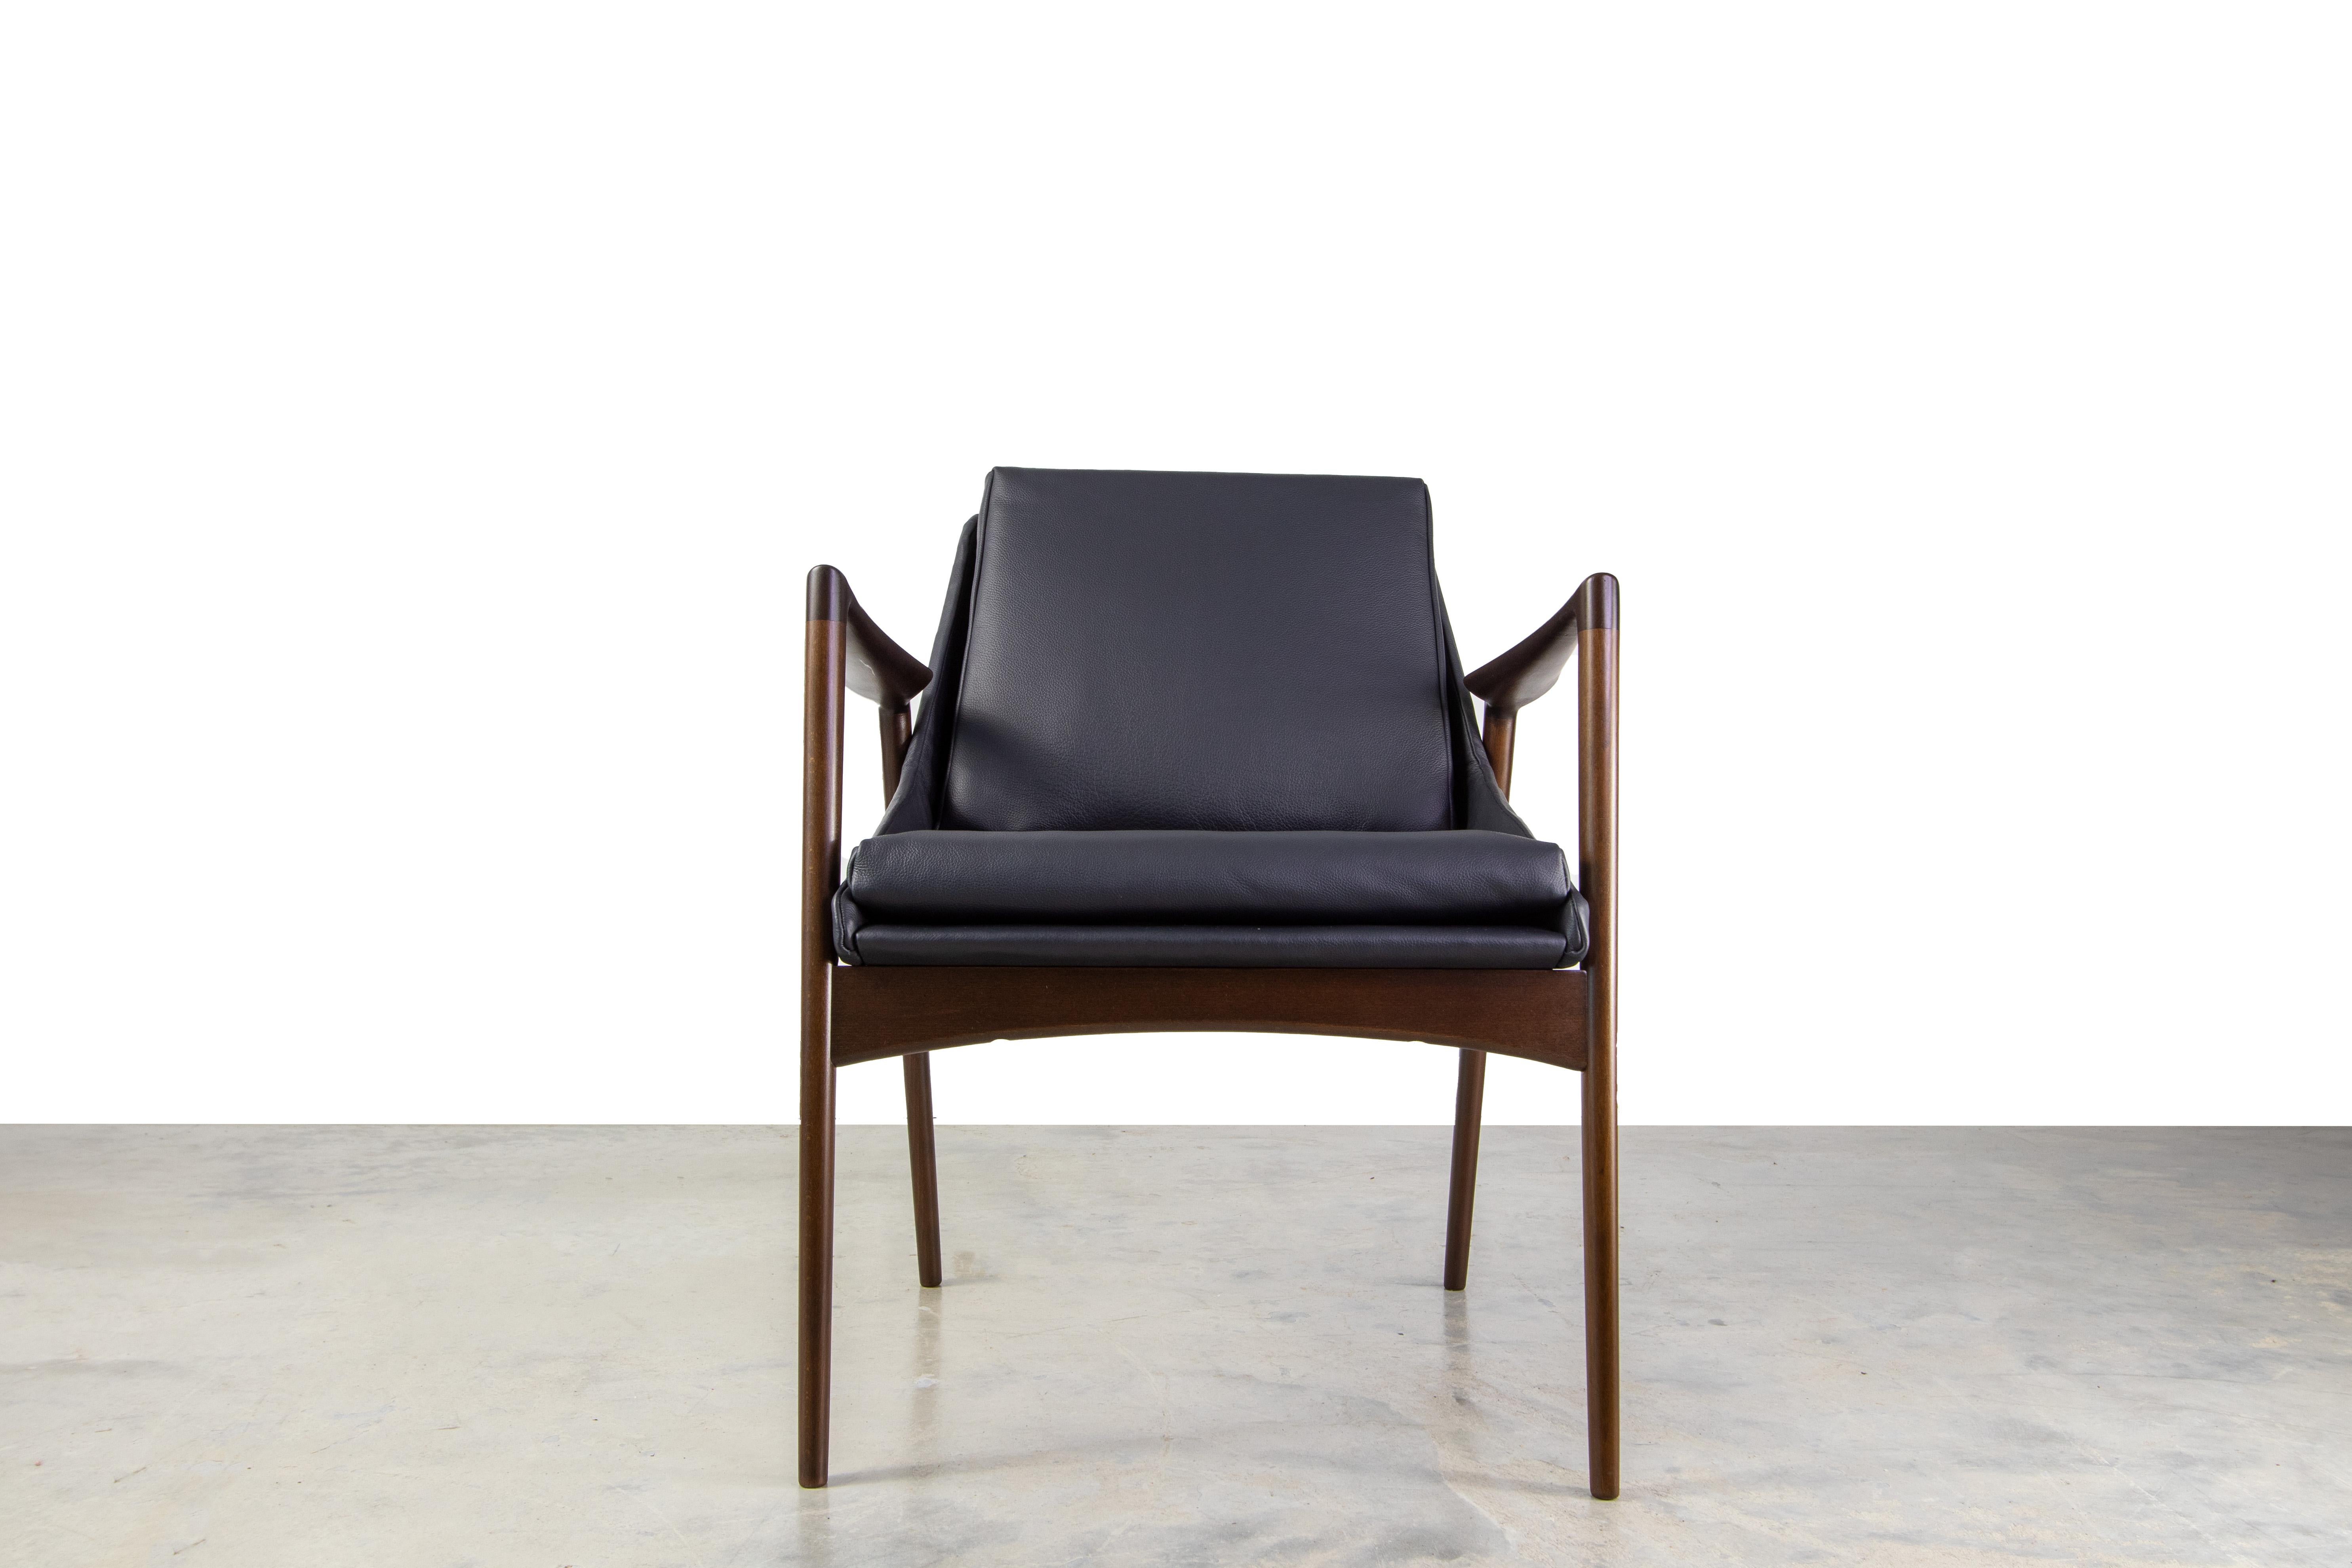 Mid-20th Century Pair of Ib Kofod Larsen for Selig Lounge Chairs in Black Leather and Beech